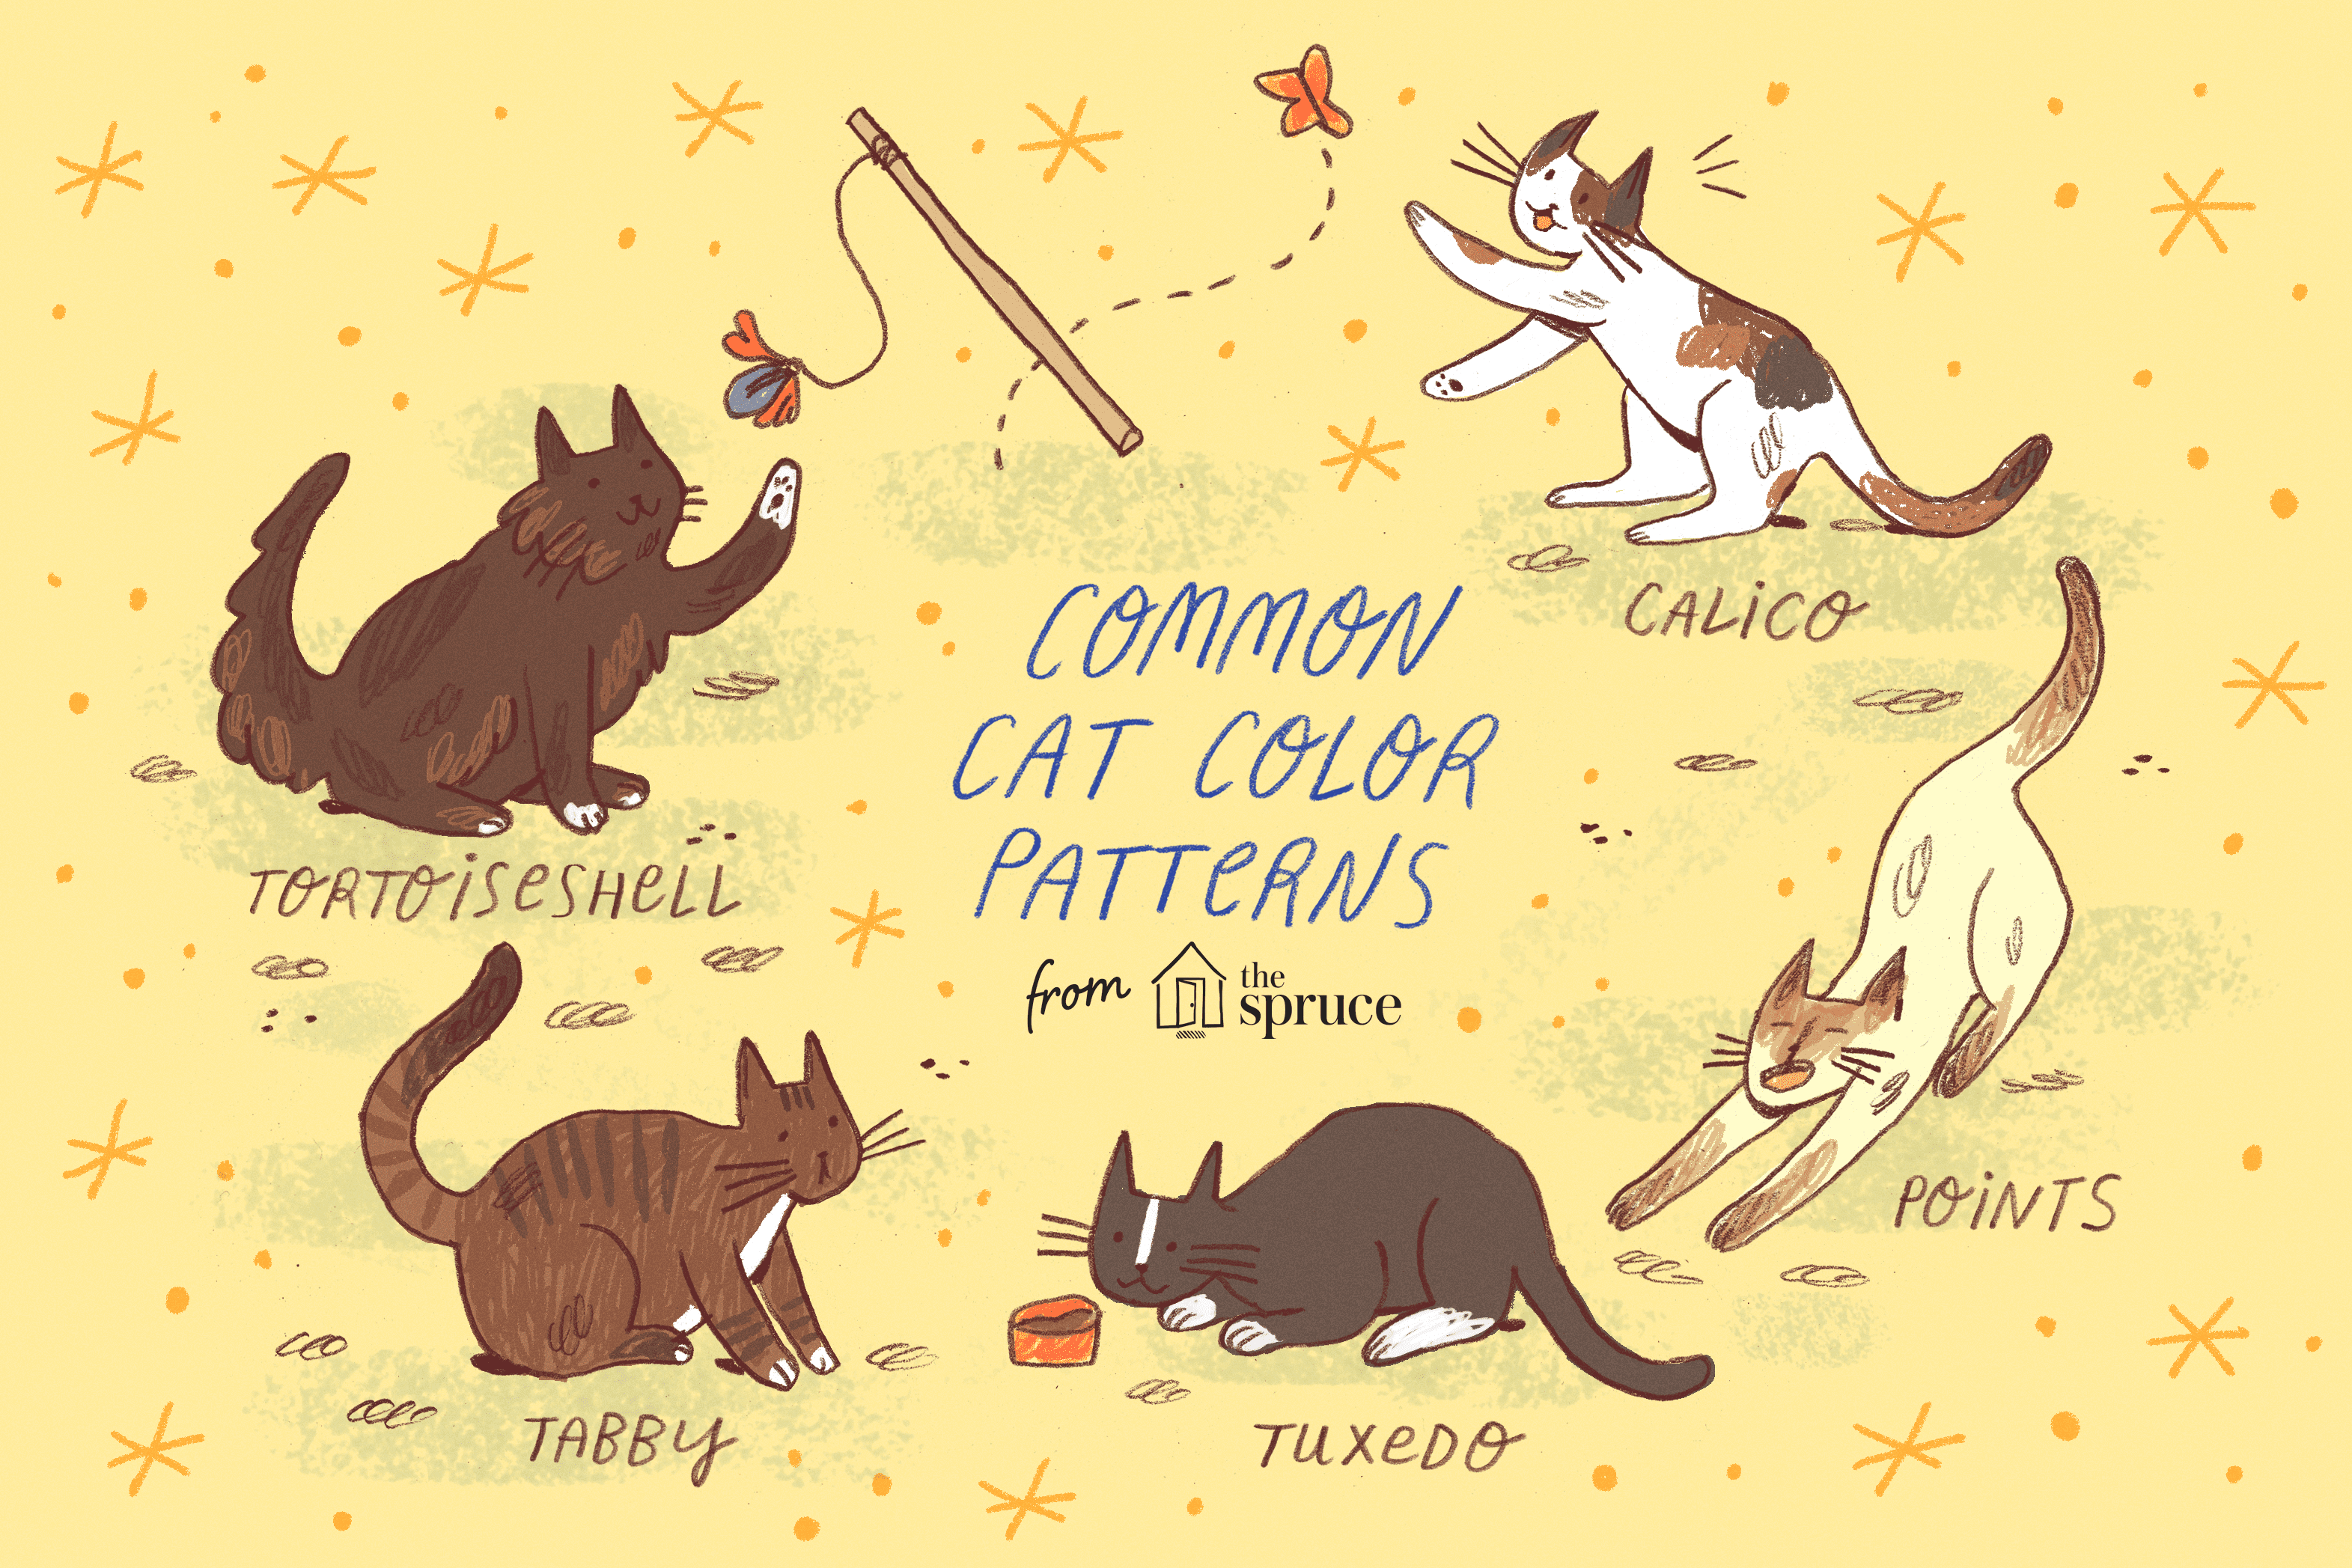 Common cat color patterns, illustrated